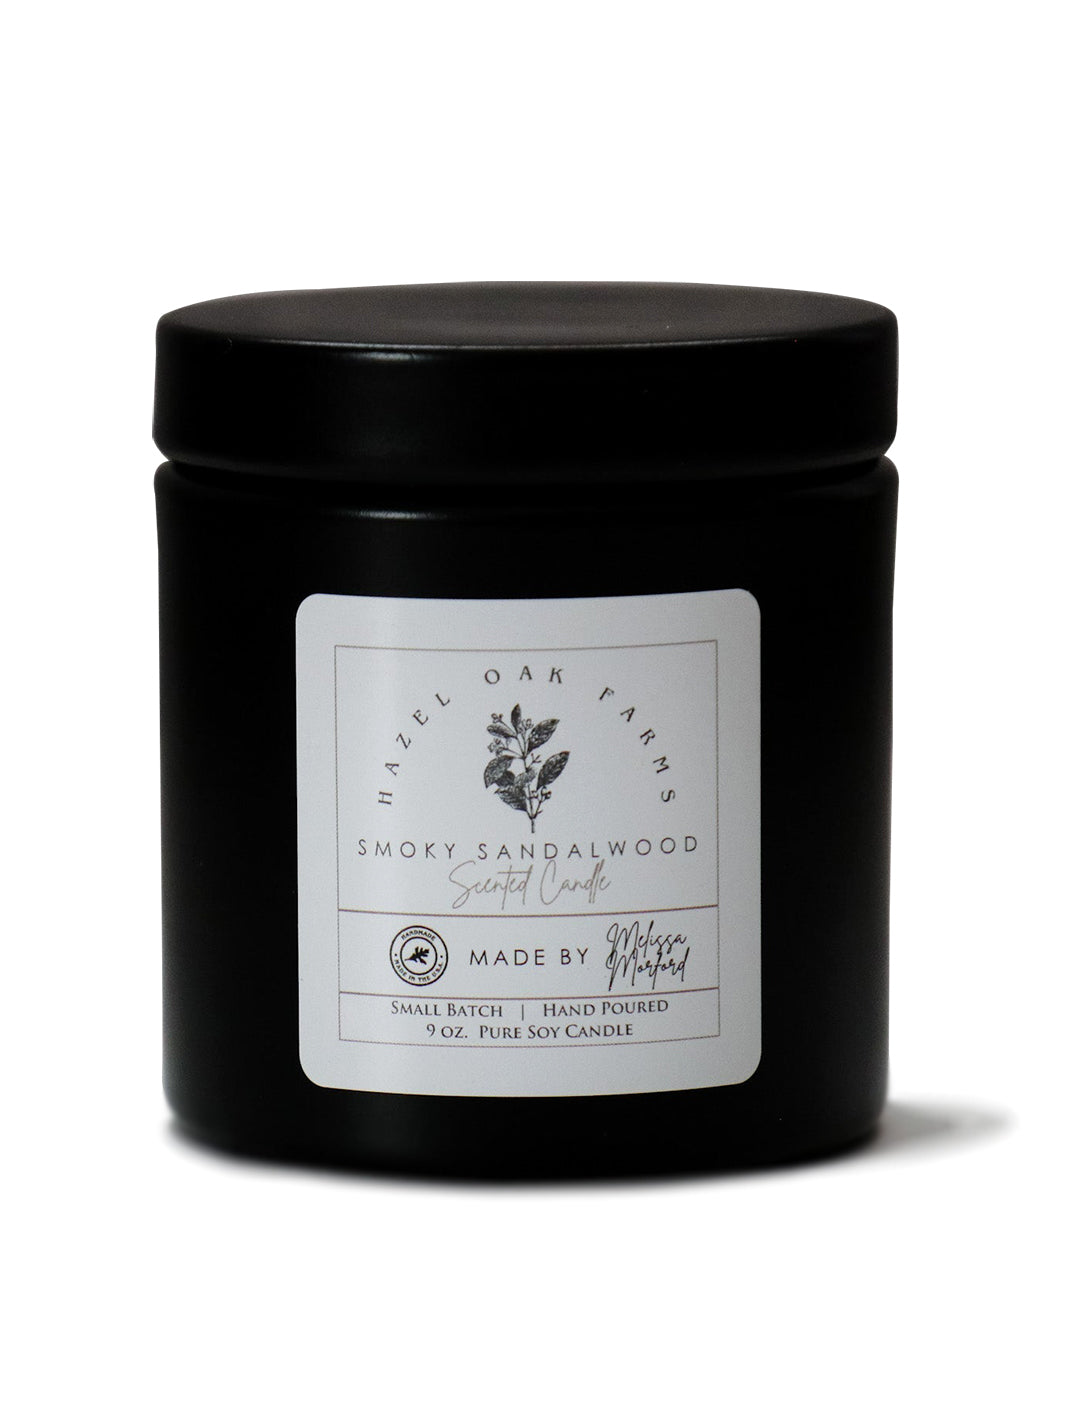 Smoky Sandalwood - Melissa's Pure Soy Candles (in stock) Earthly Comfort Home Decor 2192